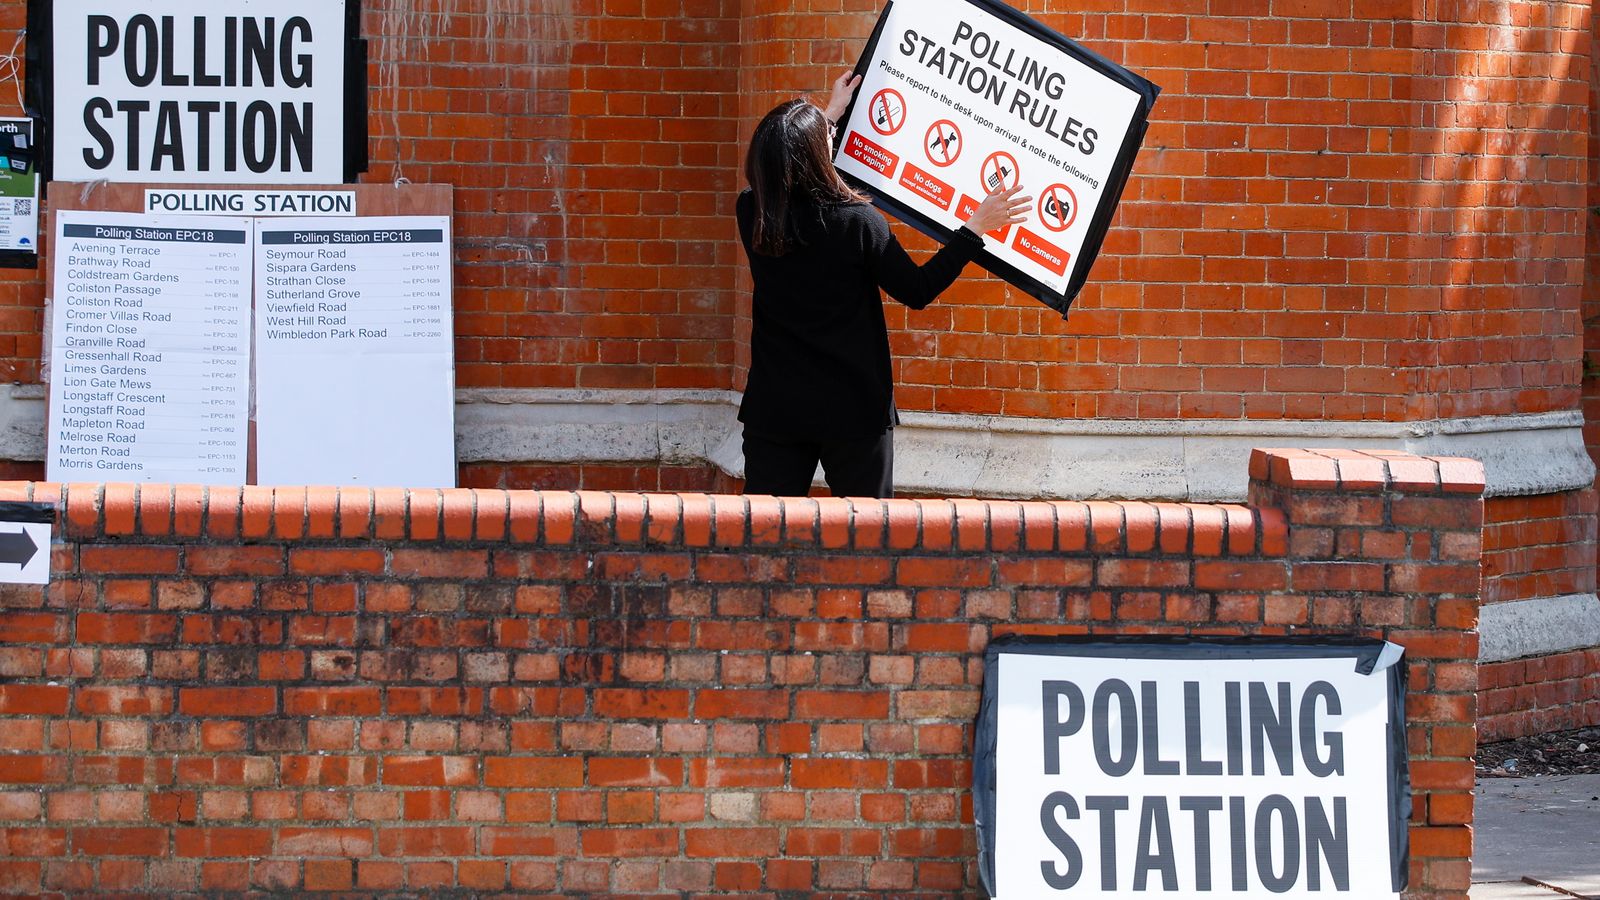 Polling station rules - don't get caught out on election day